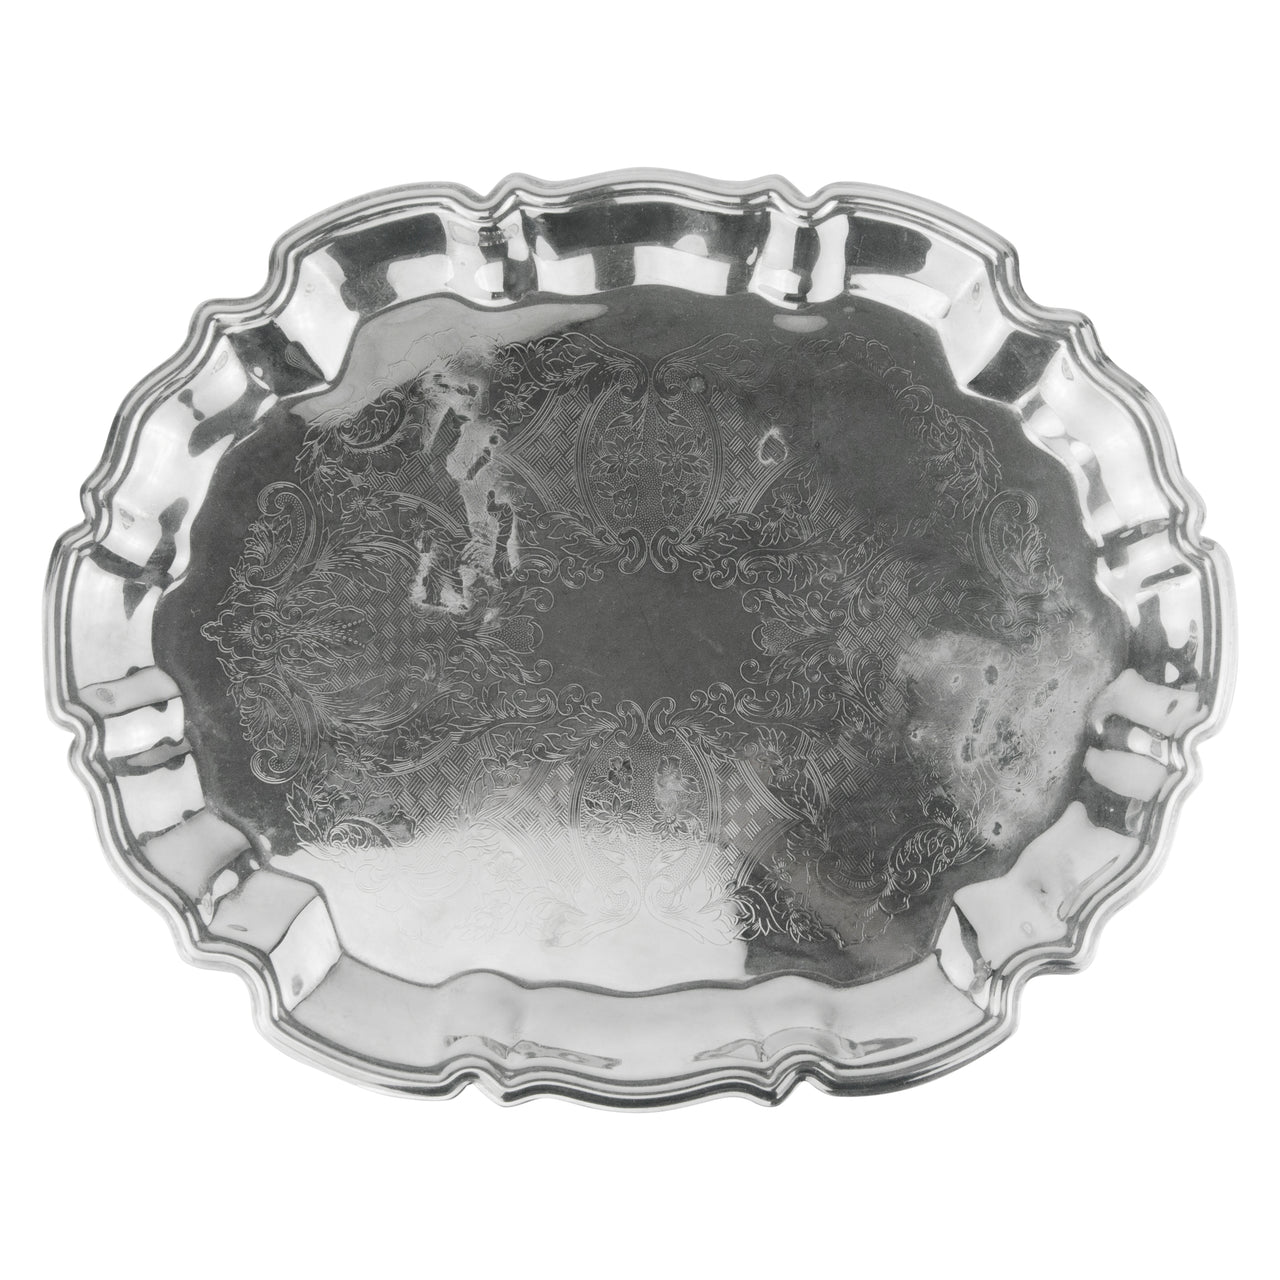 Vintage Sheridan Silver Plate Scalloped Edge Tray | The Hour Shop